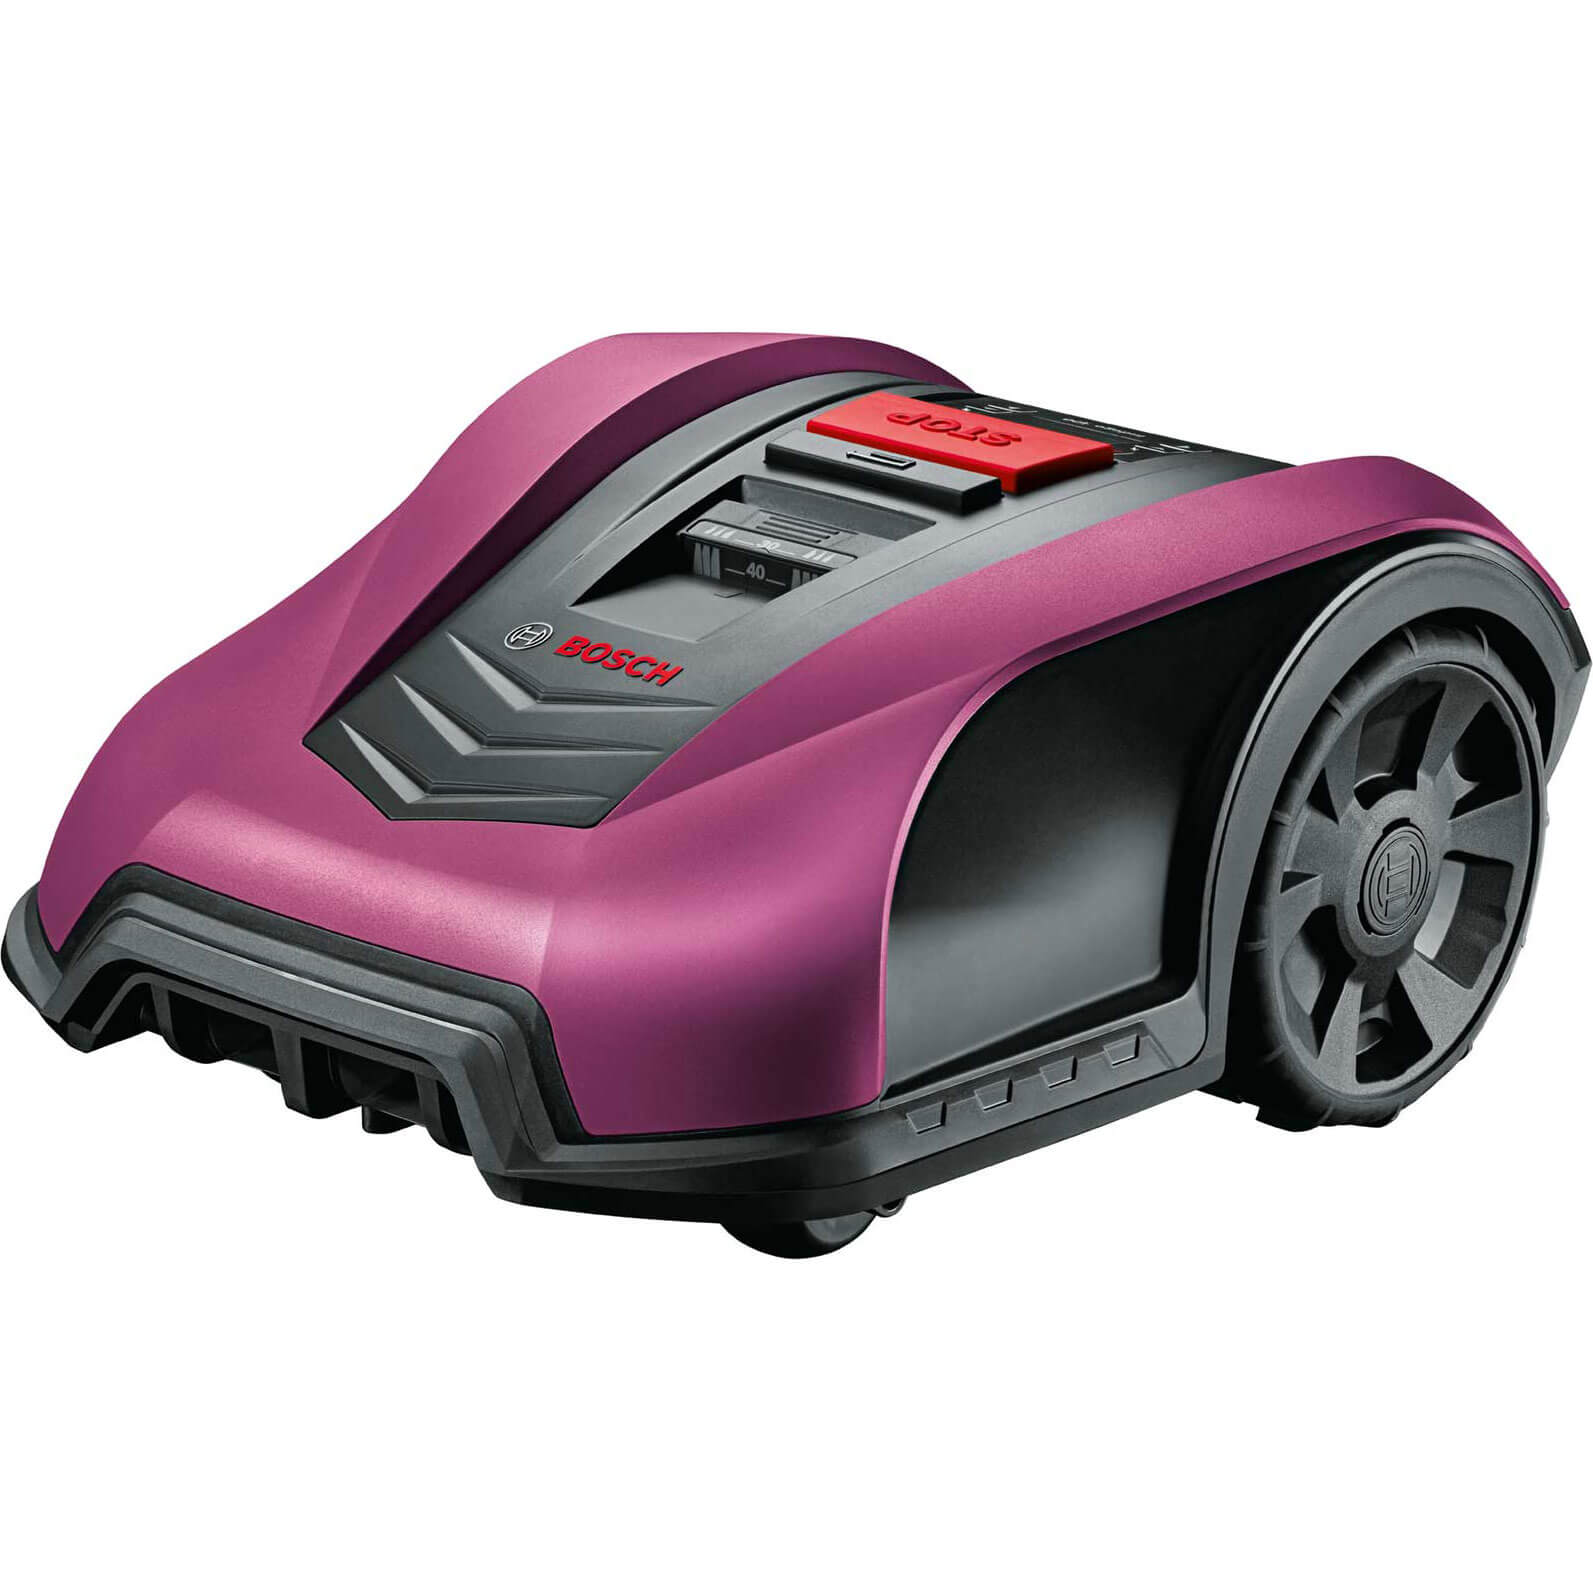 Photo of Bosch Top Cover For Indego Lawnmowers Fushia